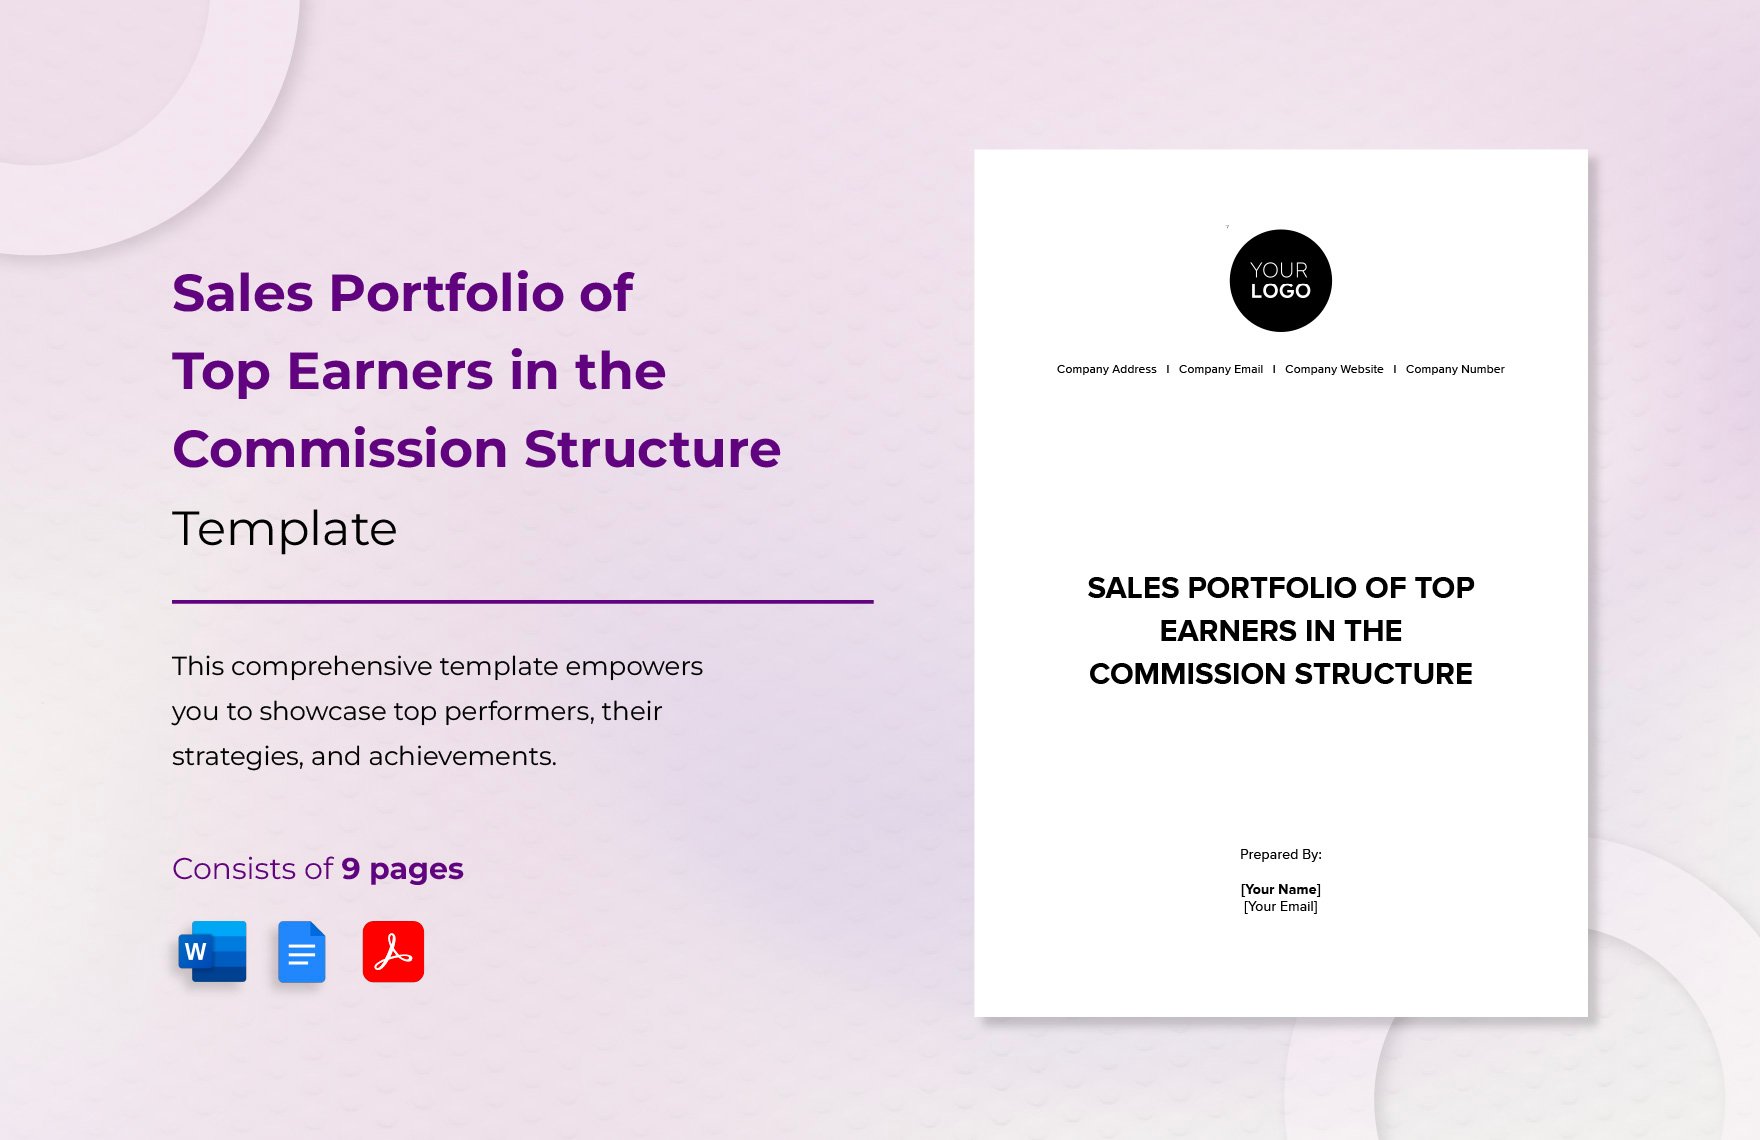 Sales Portfolio of Top Earners in the Commission Structure Template